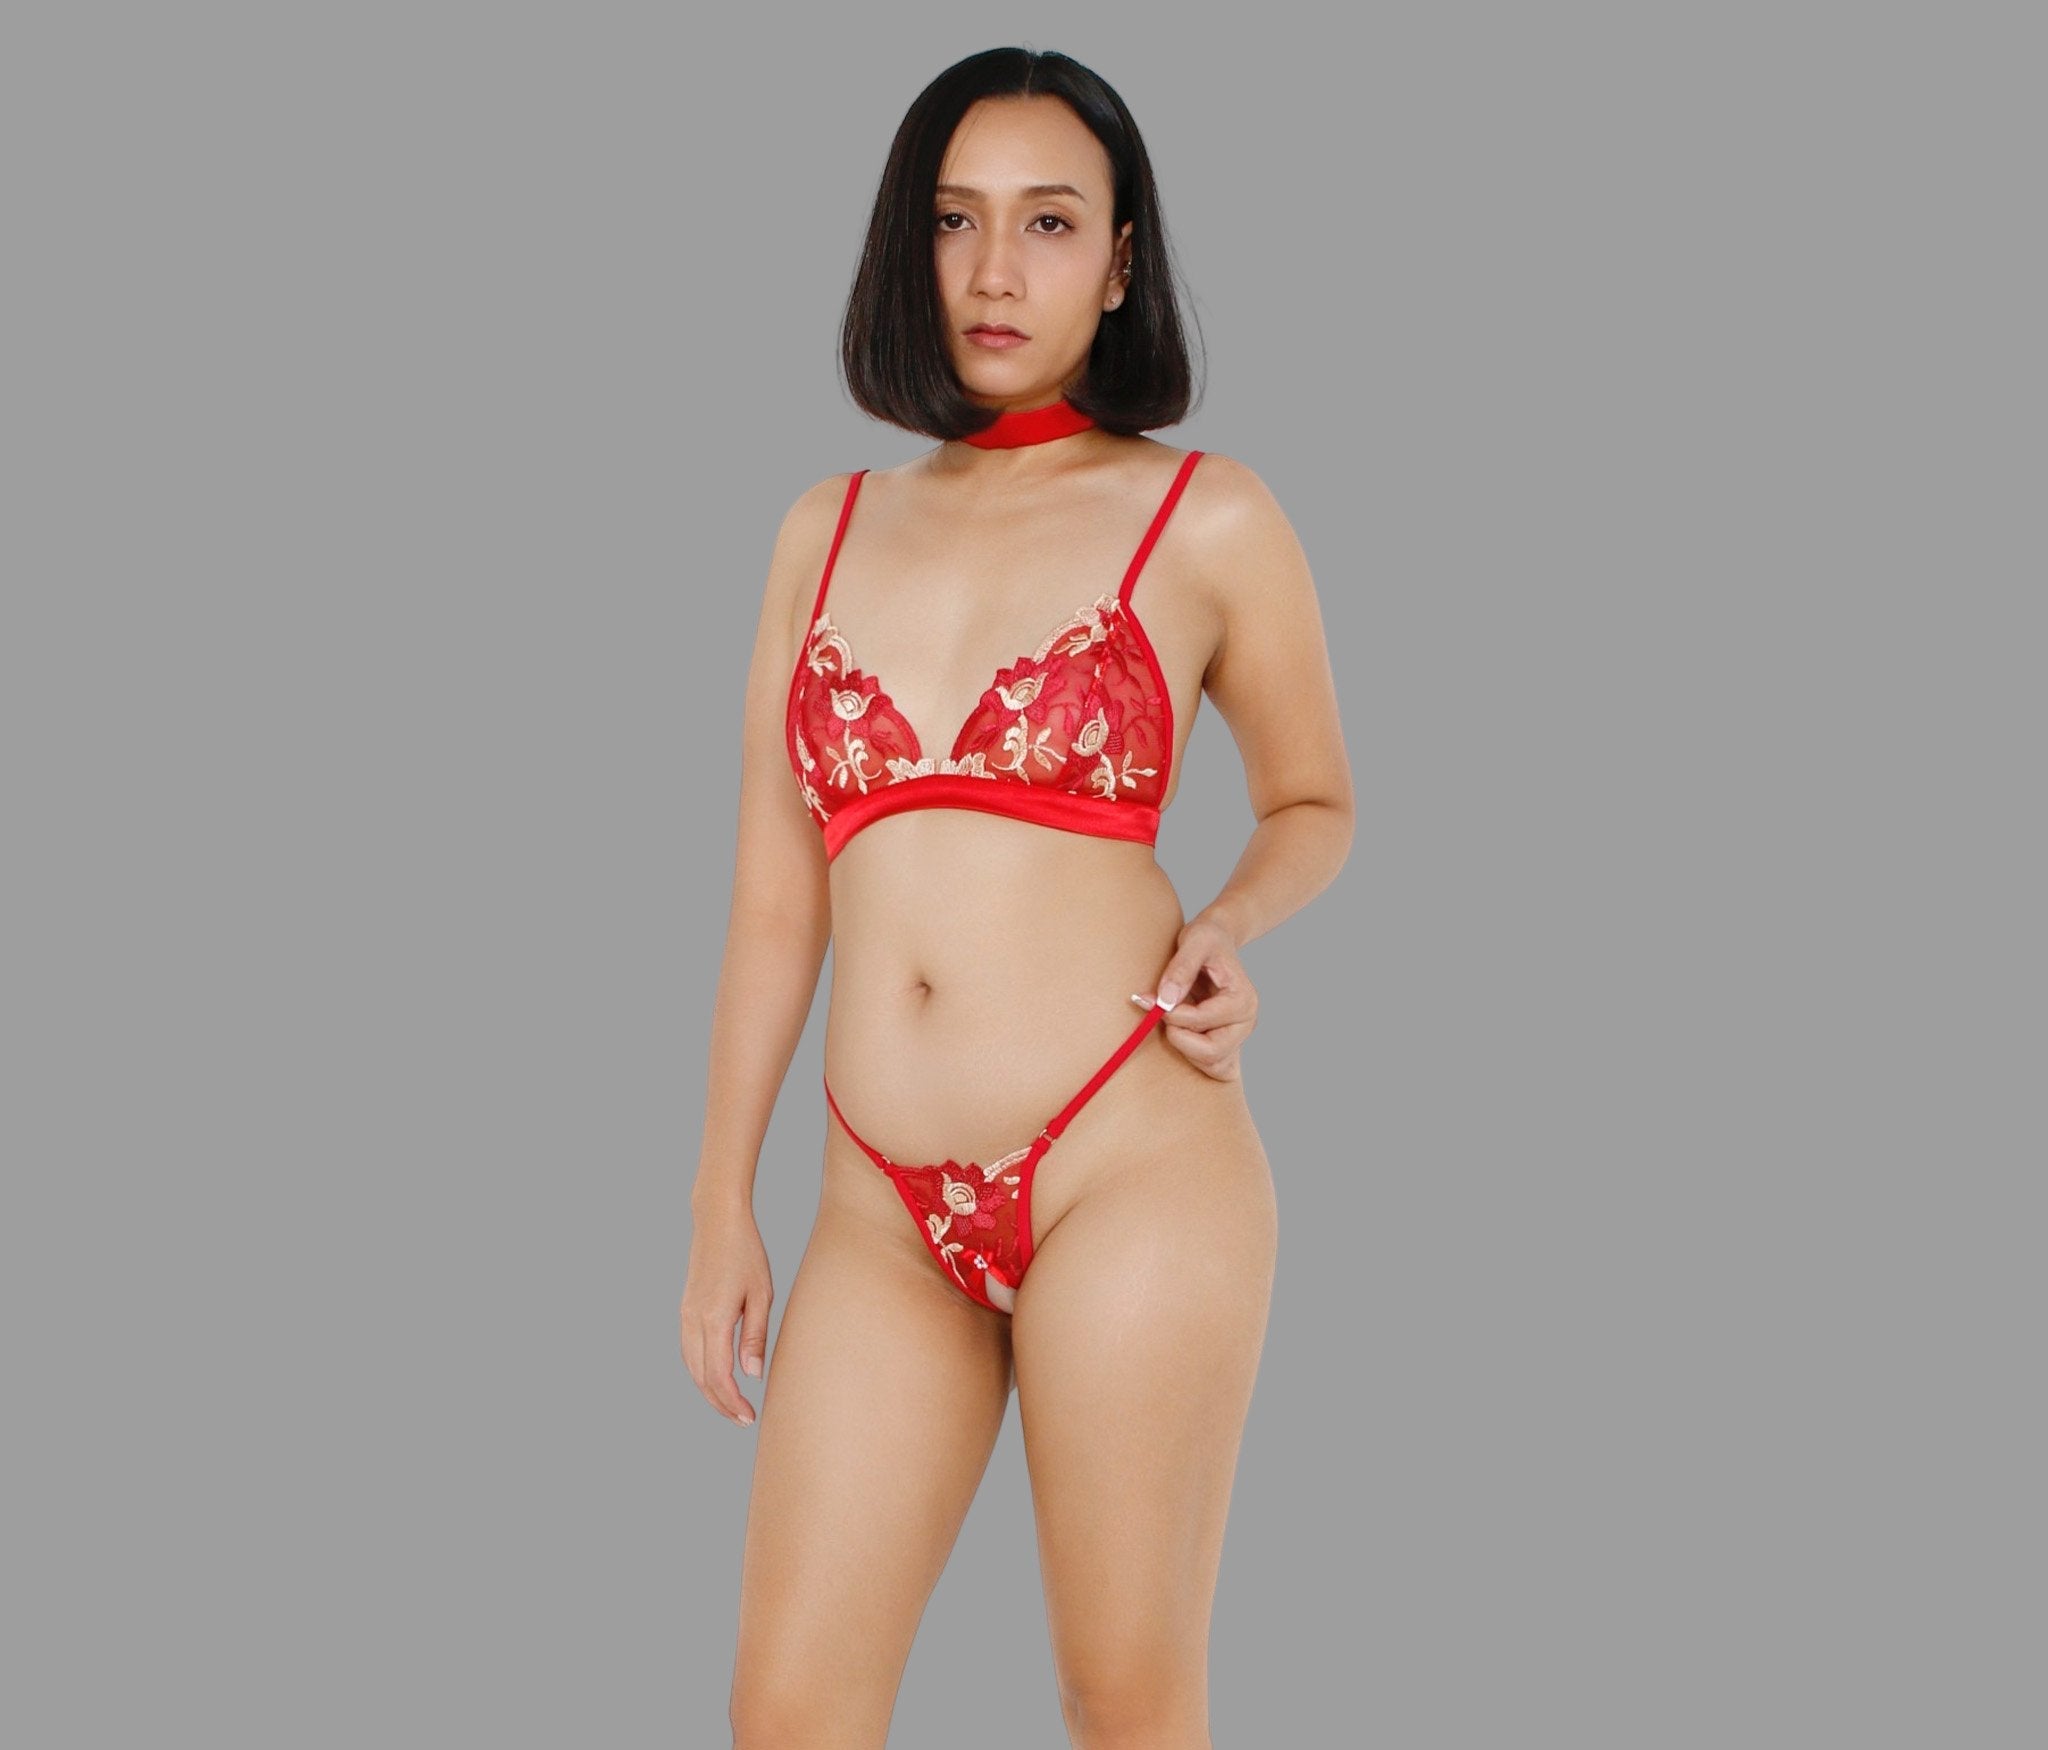 Sexy lingerie set with crotchless G string panties in see through red lace sexy sheer boudoir lingerie - Ange Déchu